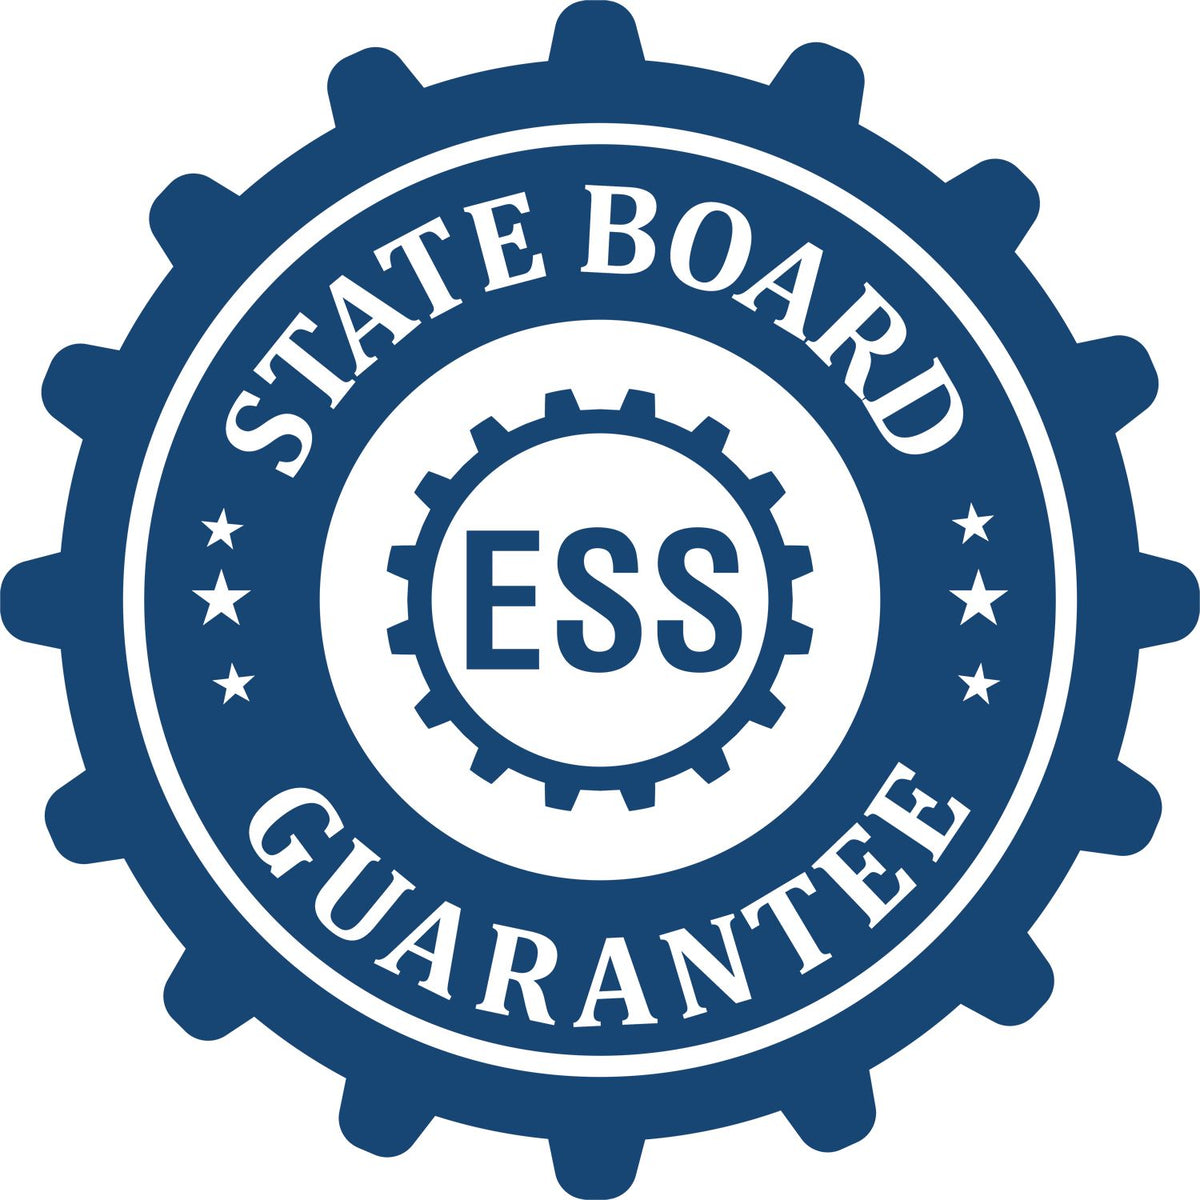 An emblem in a gear shape illustrating a state board guarantee for the Premium MaxLight Pre-Inked Nebraska Landscape Architectural Stamp product.